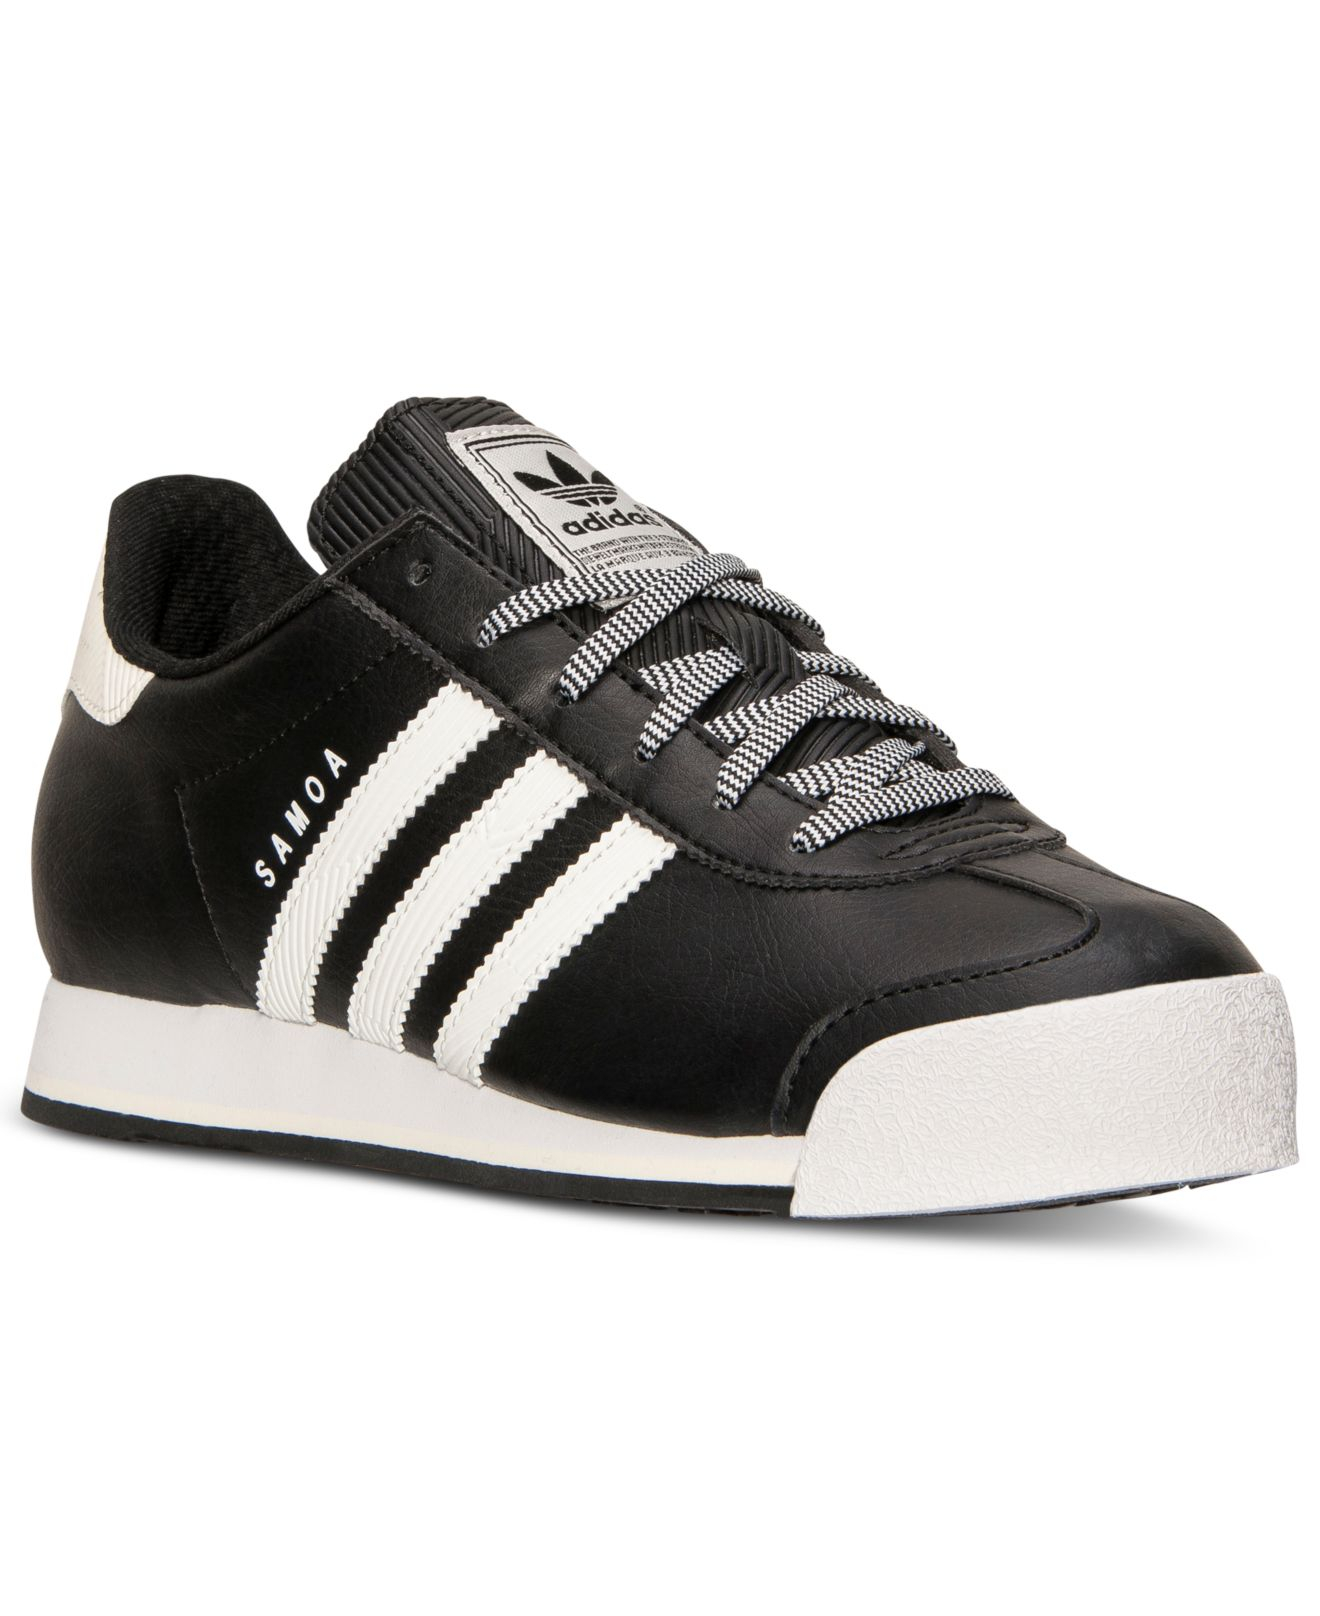 adidas Women'S Samoa Casual Sneakers From Finish Line in Black - Lyst